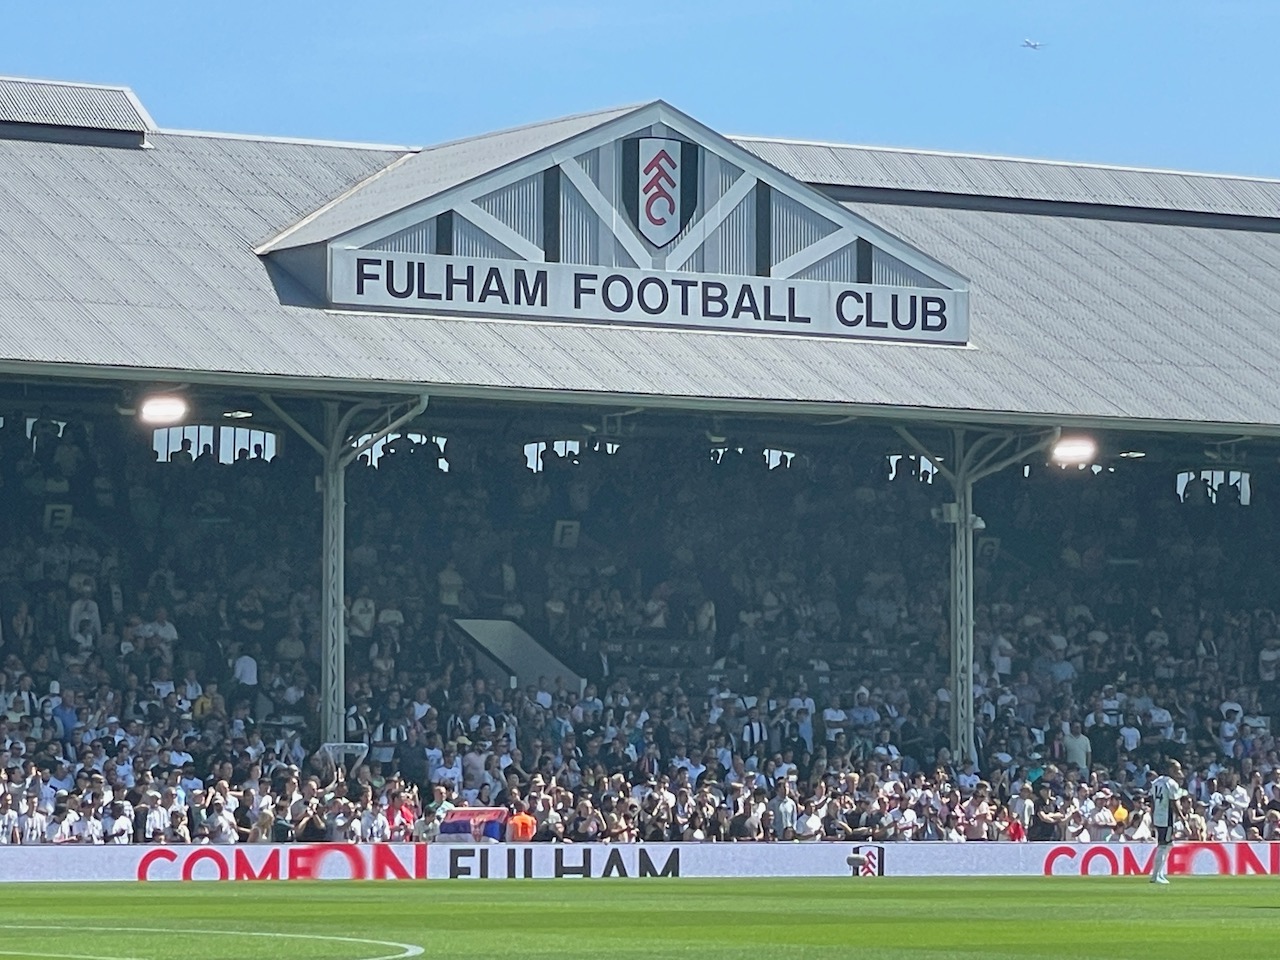 a view of Fulham's football ground filled with supporters